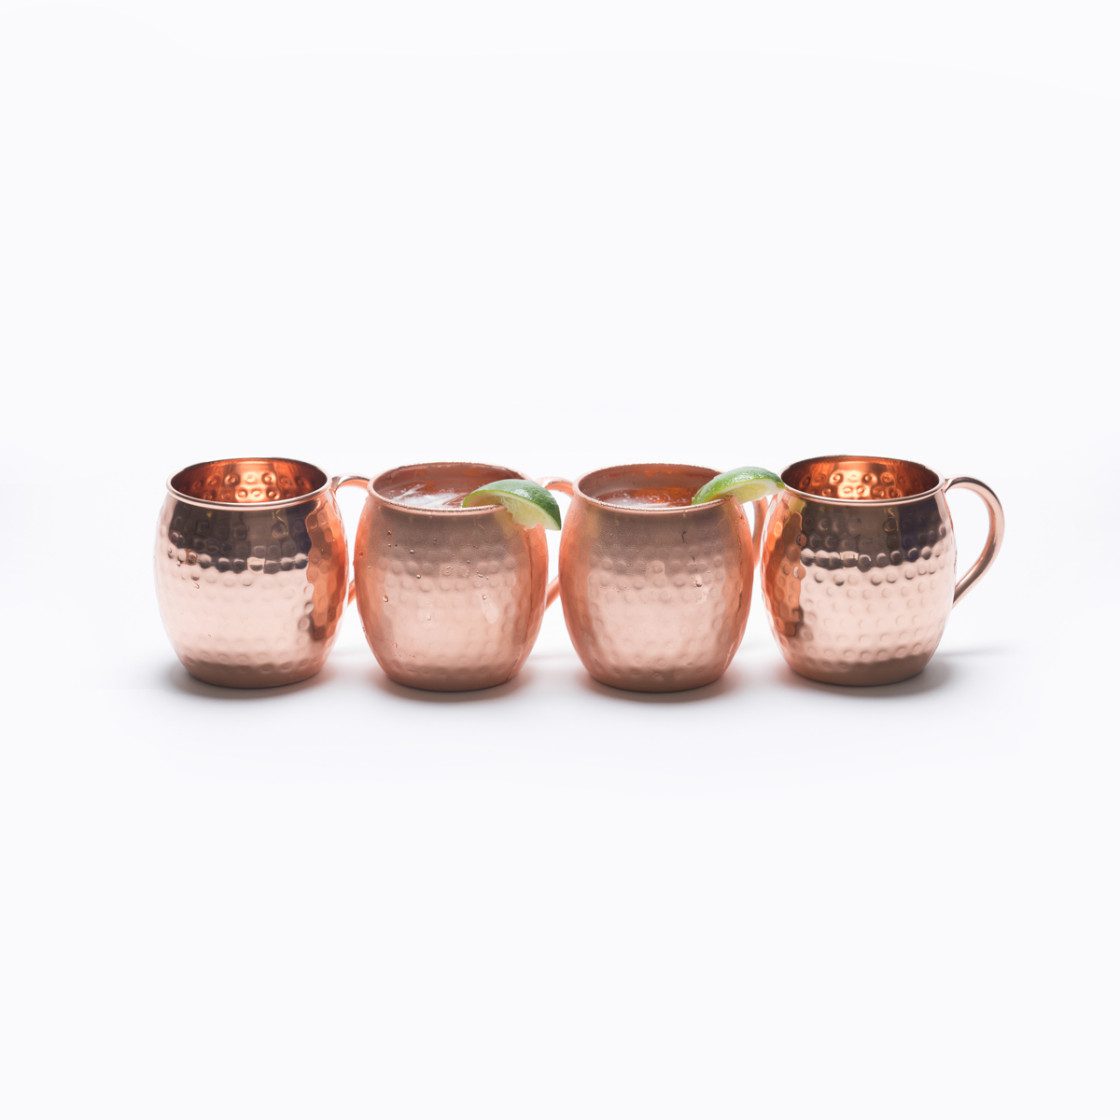 Moscow Mule 2